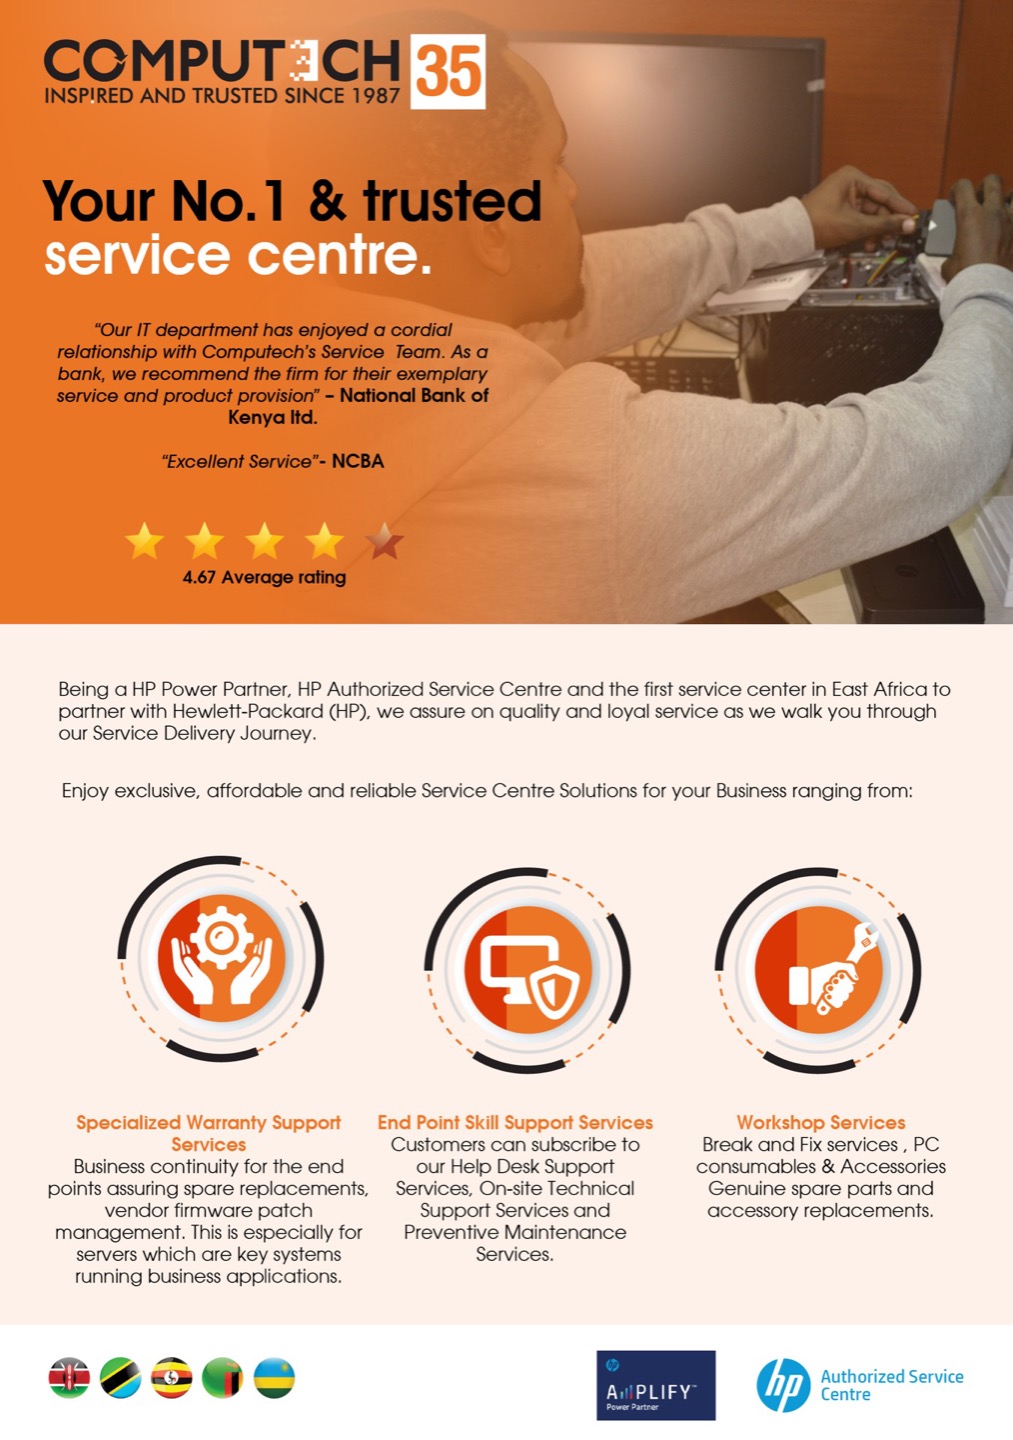 Why computech is East Africa’s #1 service centre